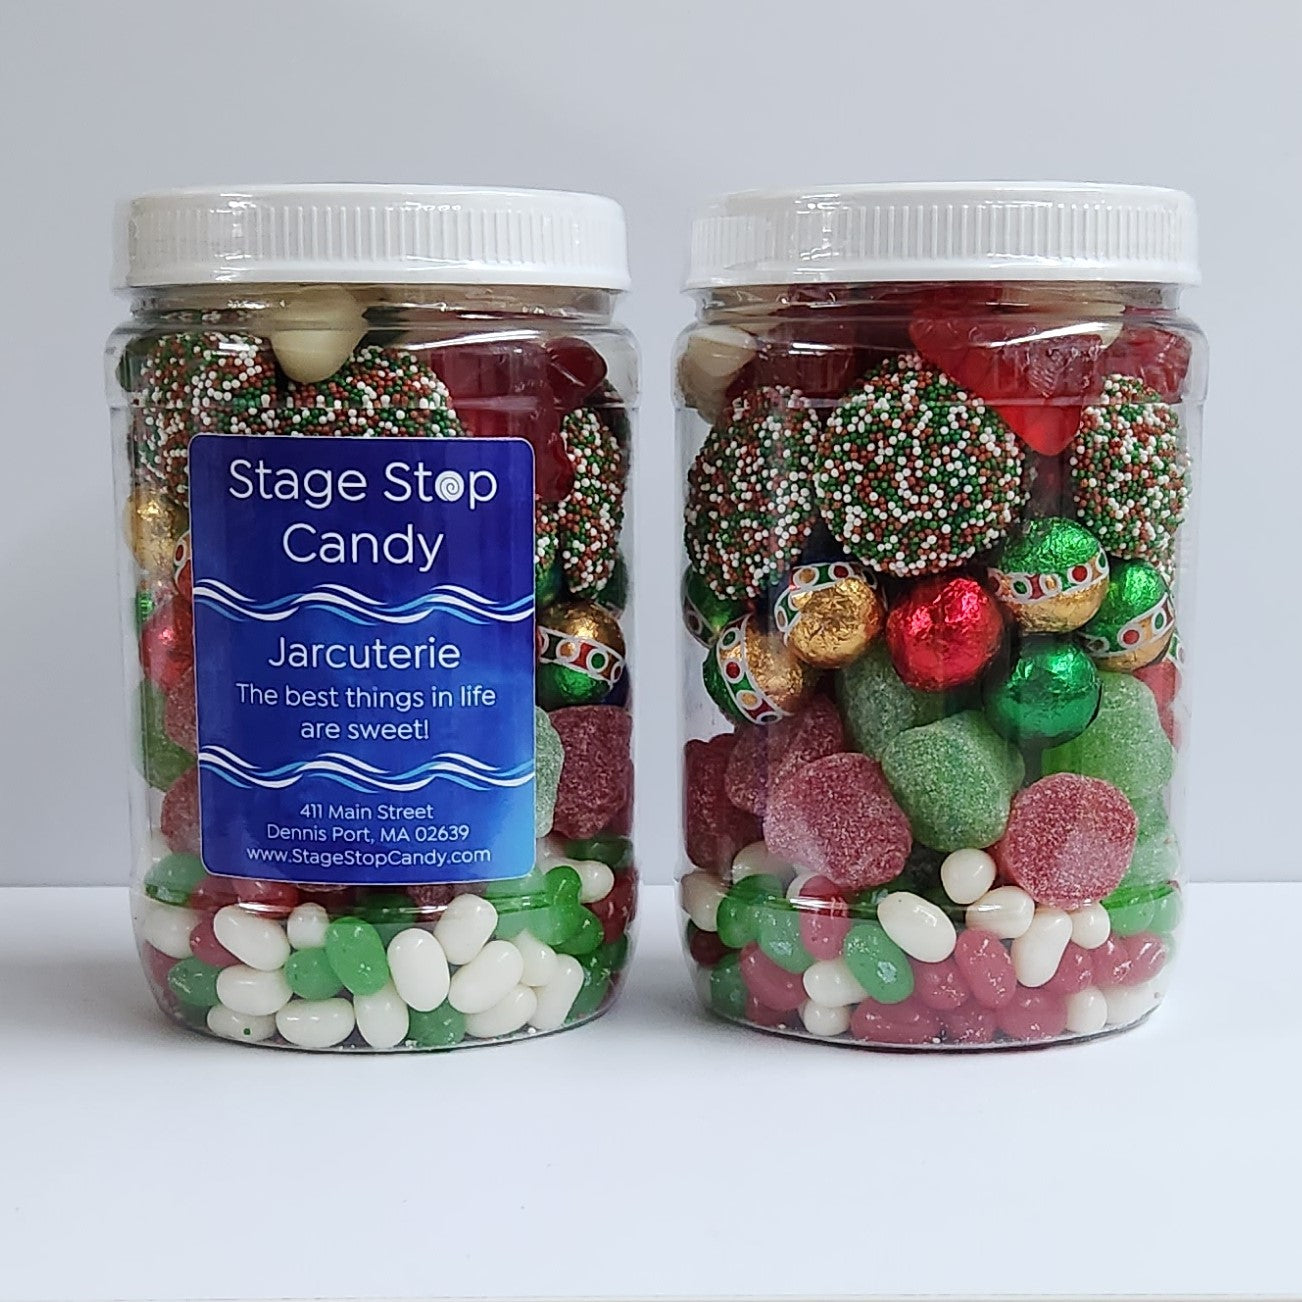 Stage Stop Candy's Christmas Jarcuterie - All your favorite Christmas candies packaged together in a plastic jar. 